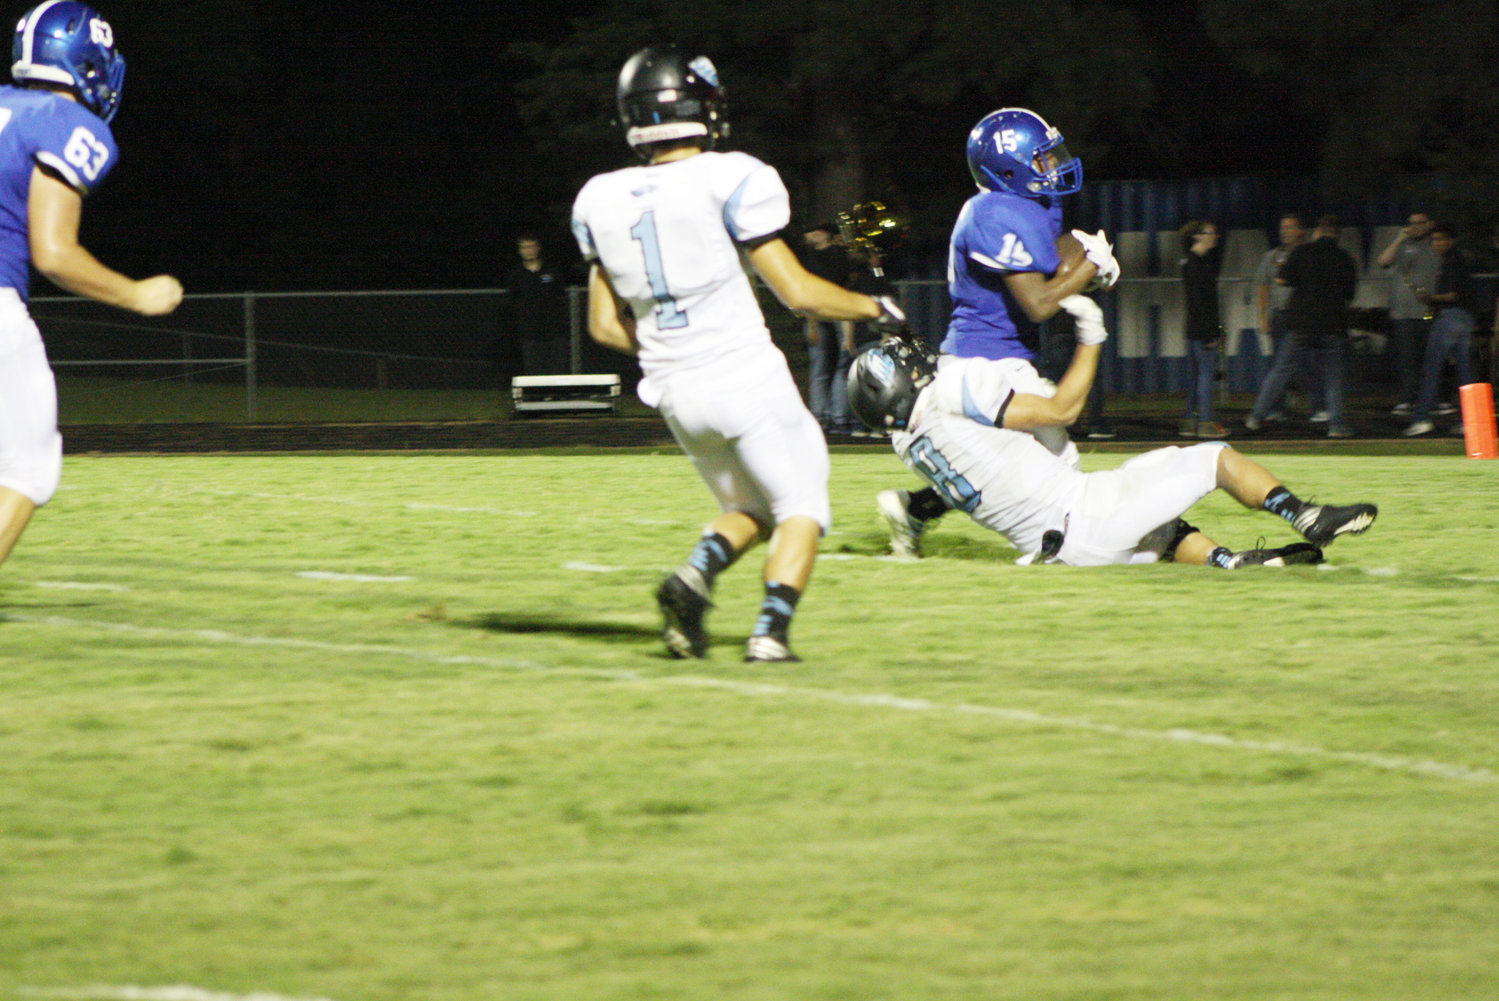 Hawk receiver Everin Gipson struggles to retain possession against Como defenders.  (Photo courtesy of Taylor Jones)